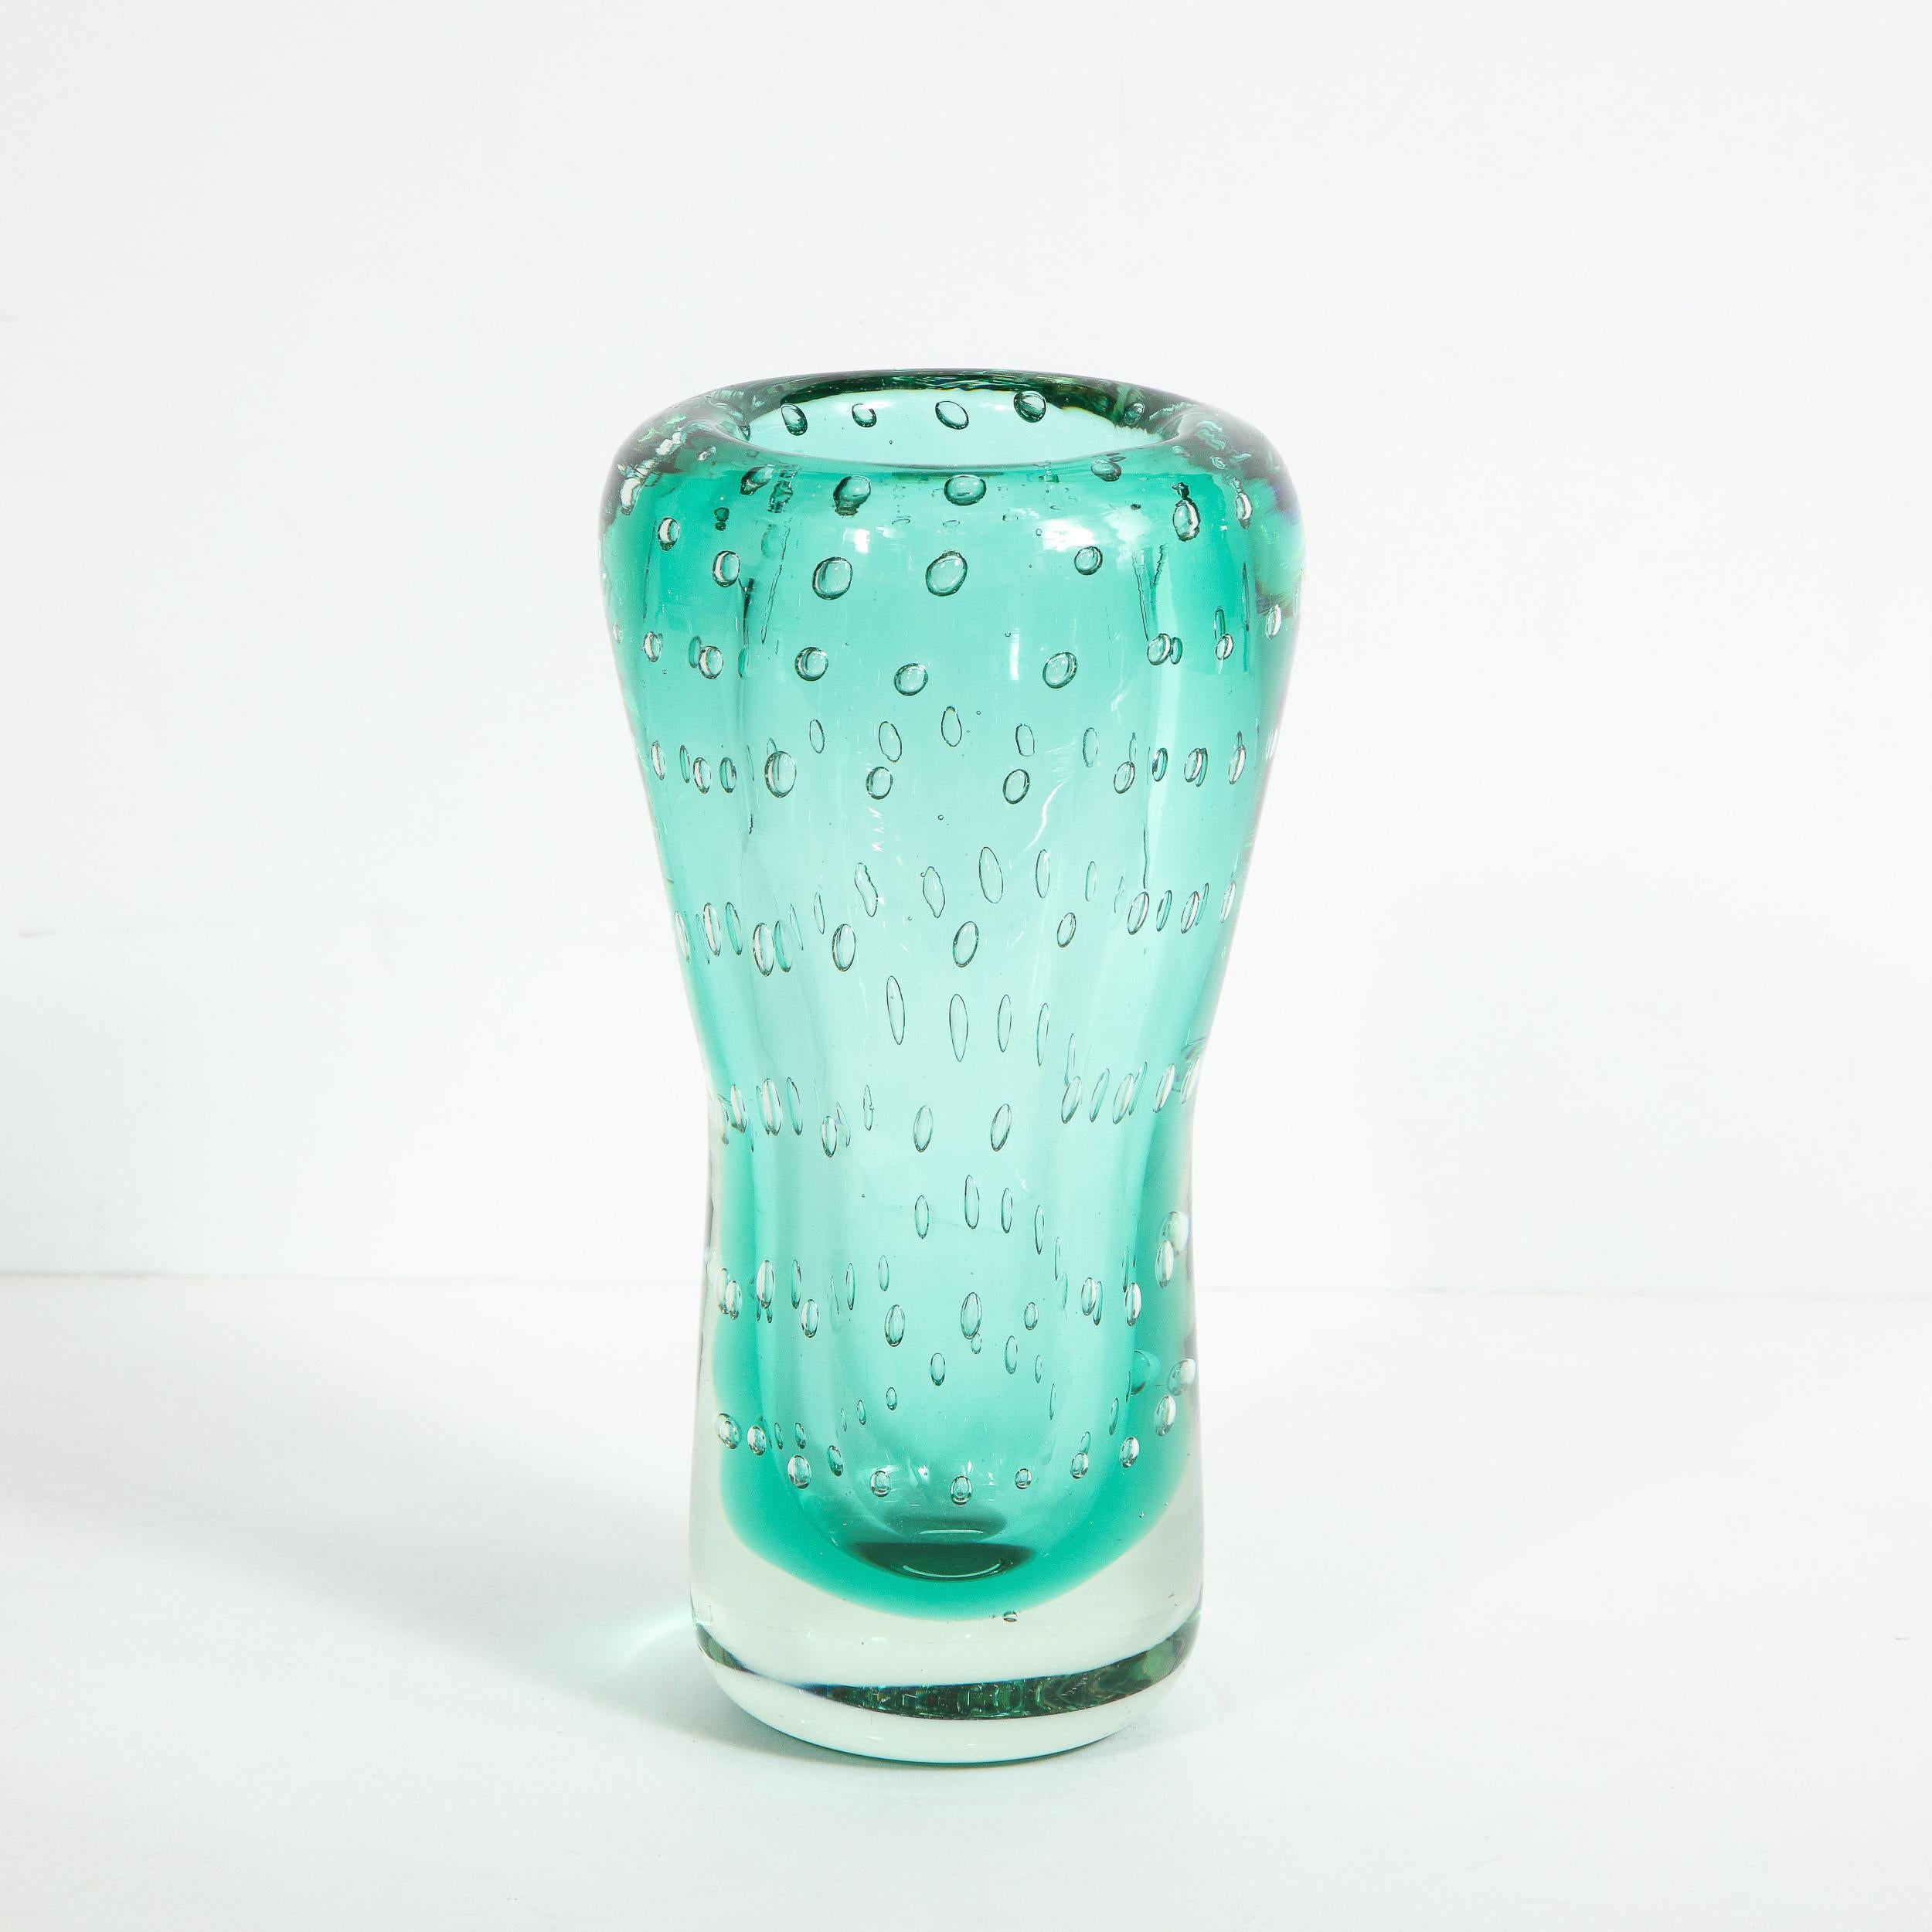 This elegant Mid-Century Modern vase was realized in Murano, Italy, the island off the coast of Venice renowned for centuries for its superlative glass production, circa 1960. It features a cylindrical body that tapers towards its base in